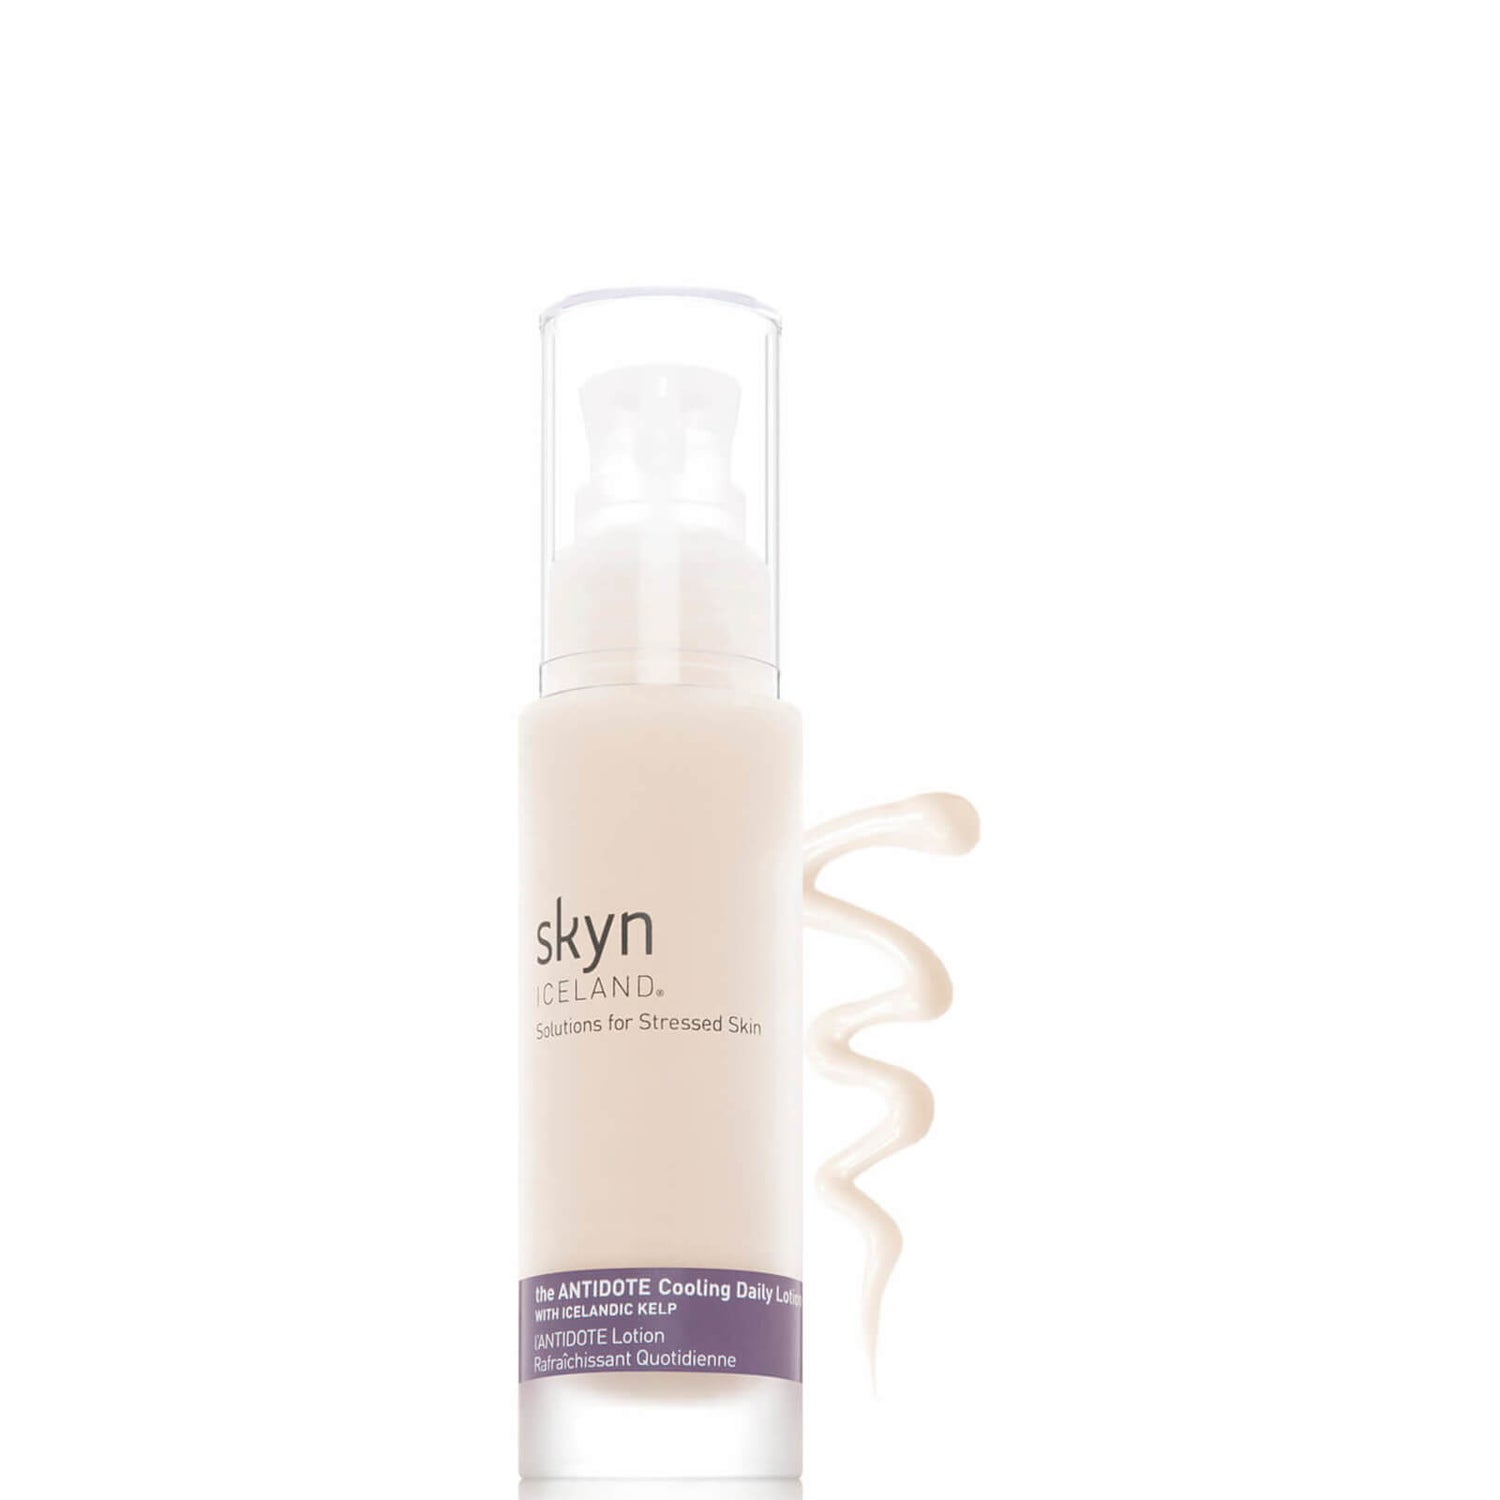 skyn ICELAND The Antidote Cooling Daily Lotion With Icelandic Kelp (1.7 fl. oz.)